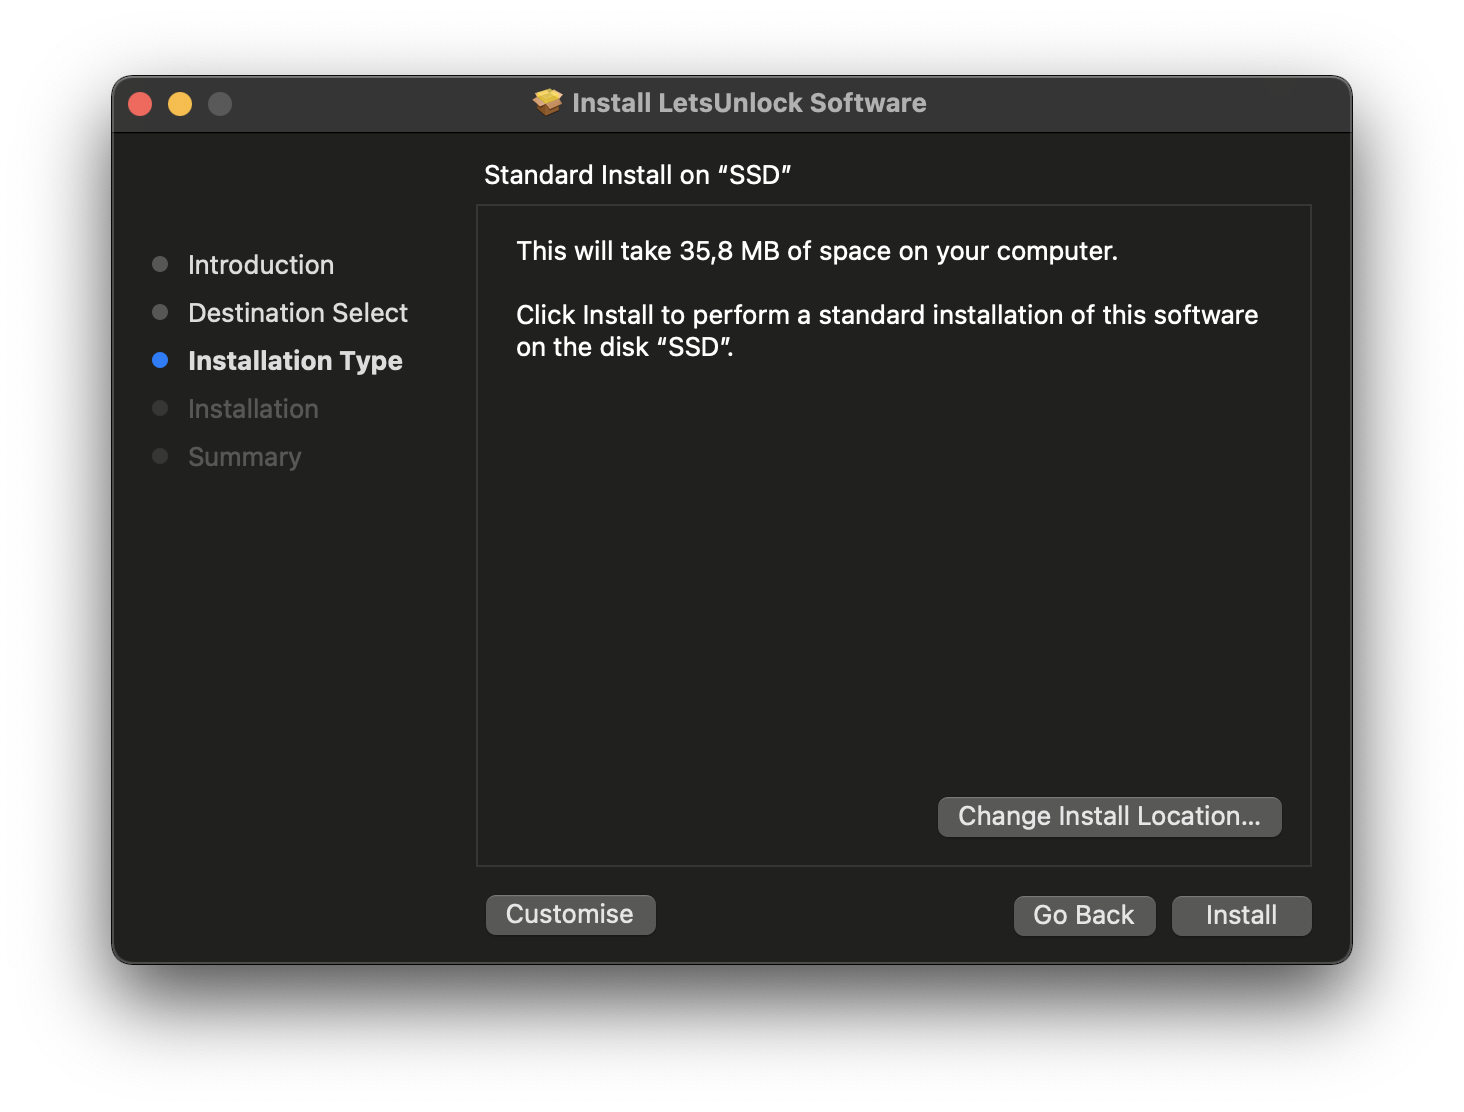 Install LetsUnlock iCloud Bypass Tool step 2 